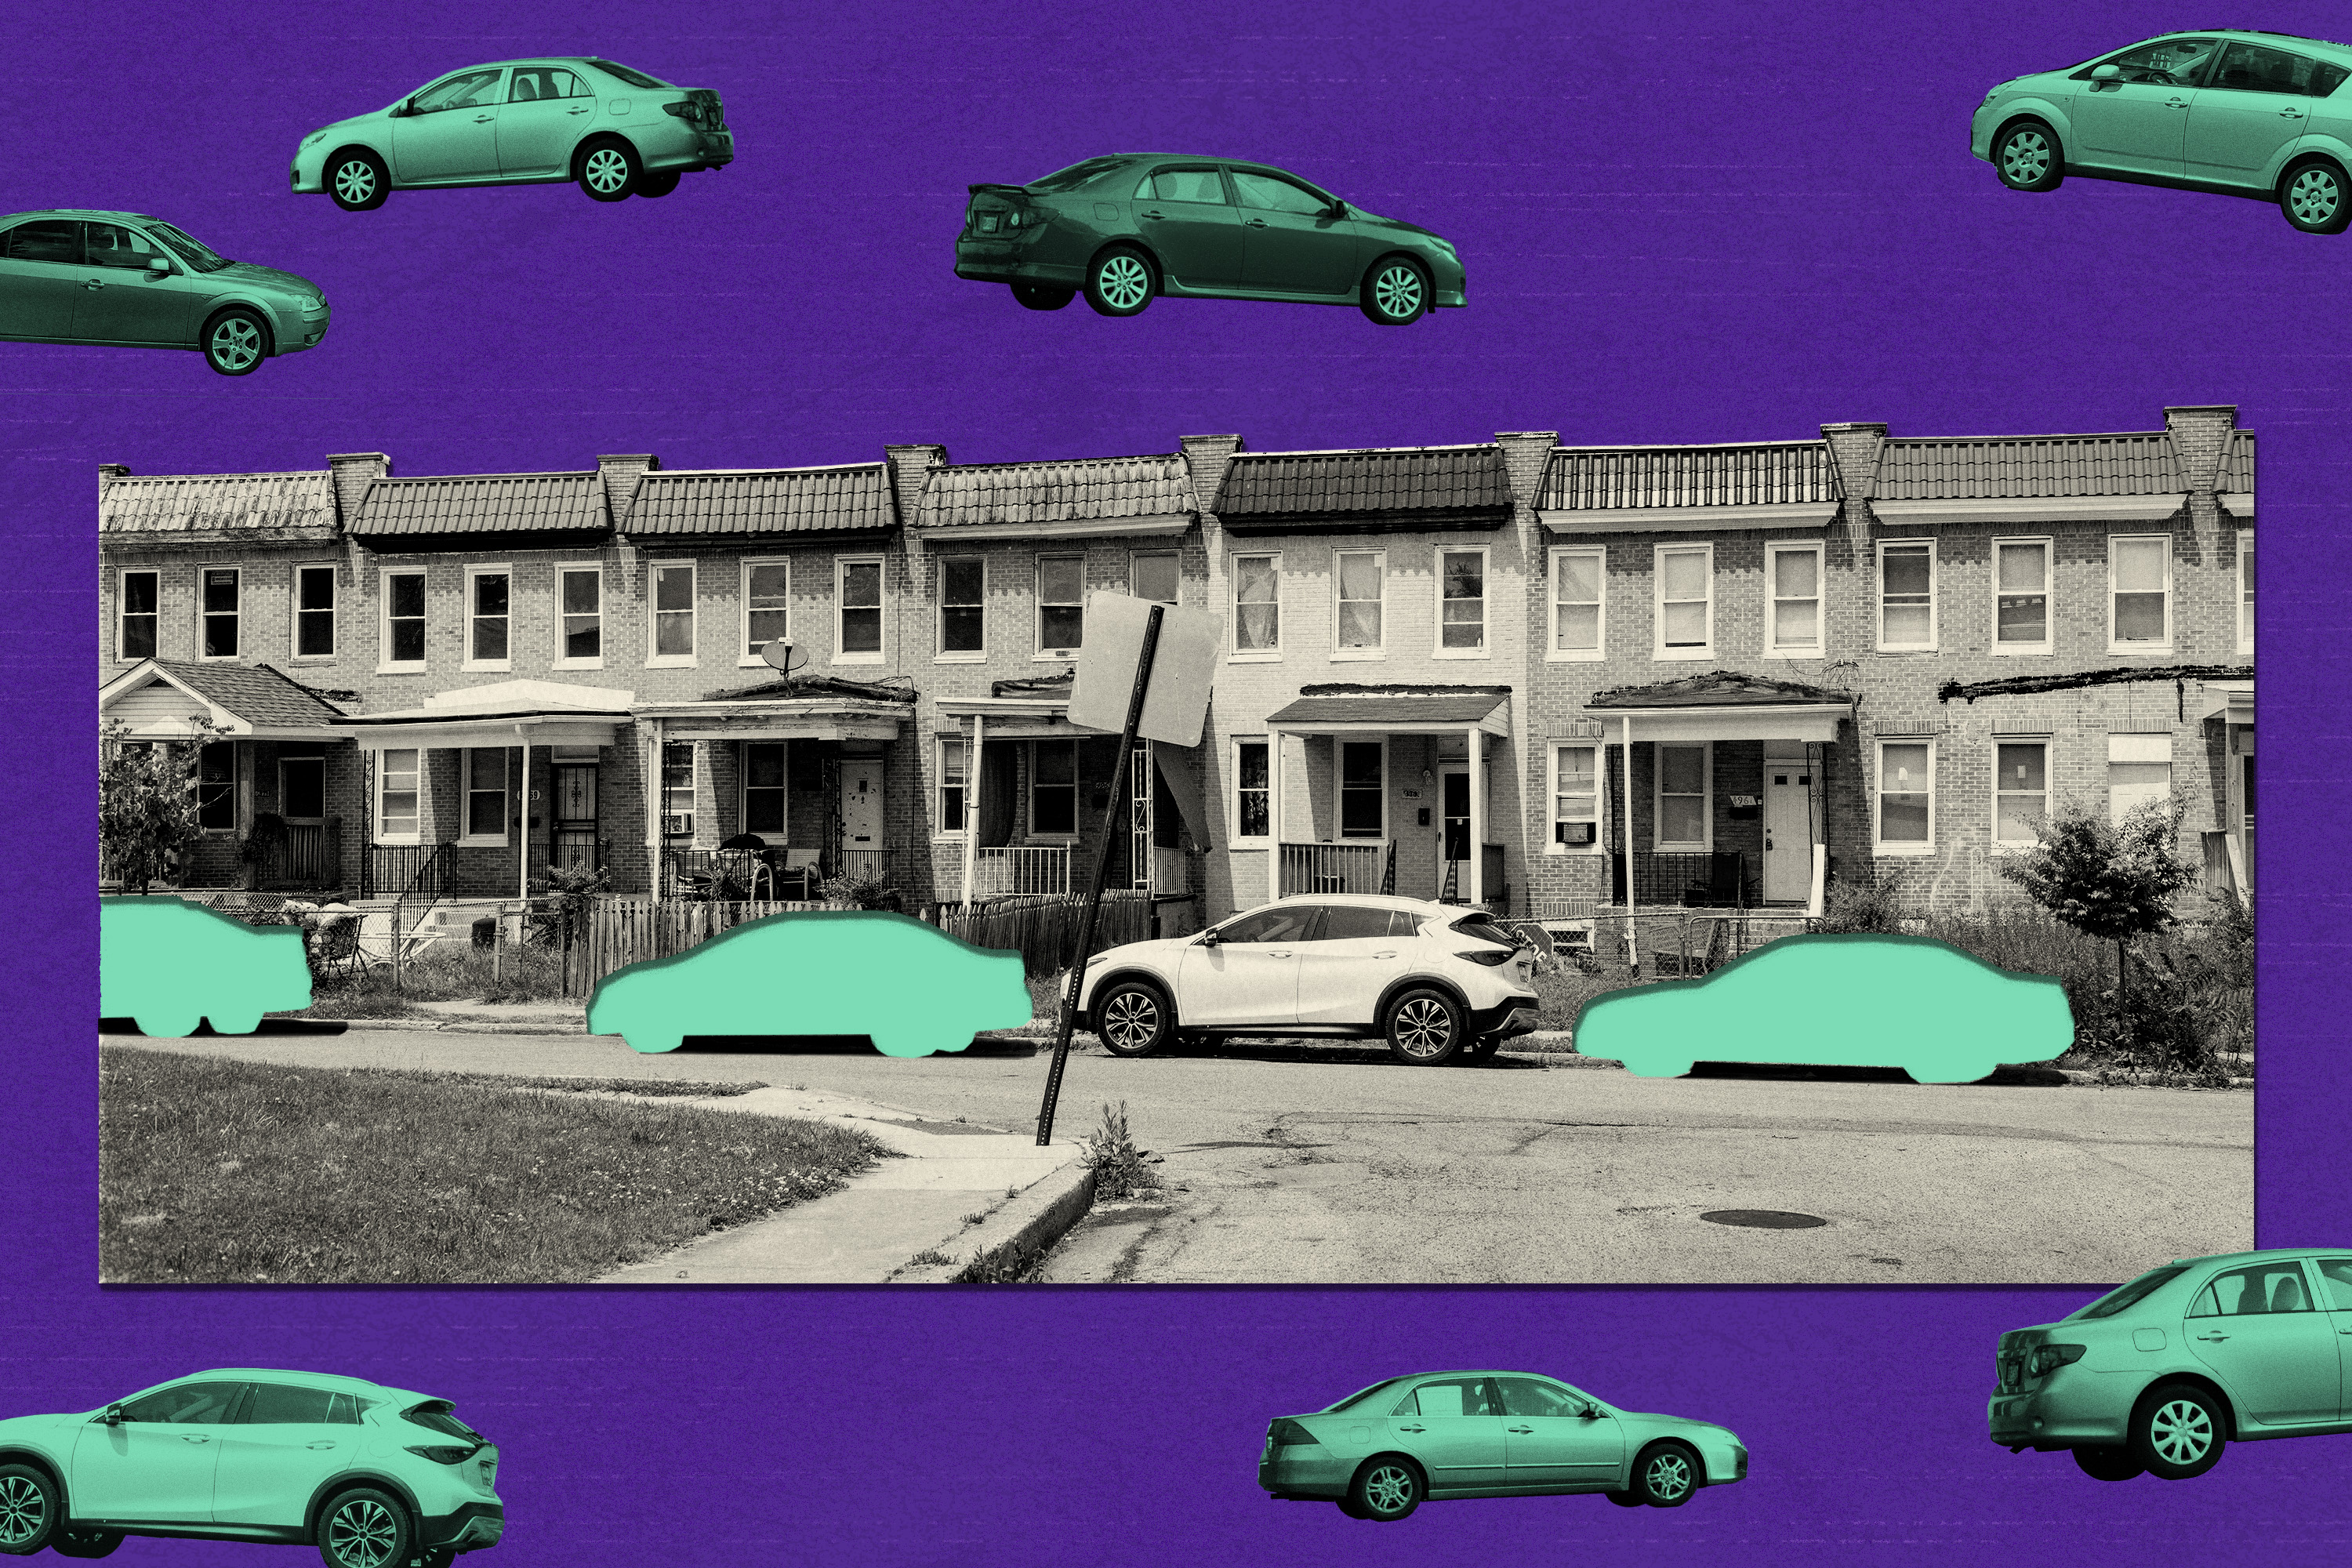 Photo illustration of block of Baltimore City row houses against dark purple background, with one parked car in front and three other parked cars cut out of image to show bright teal behind. Isolated teal-colored cars randomly scattered above and below the photo of the row houses.